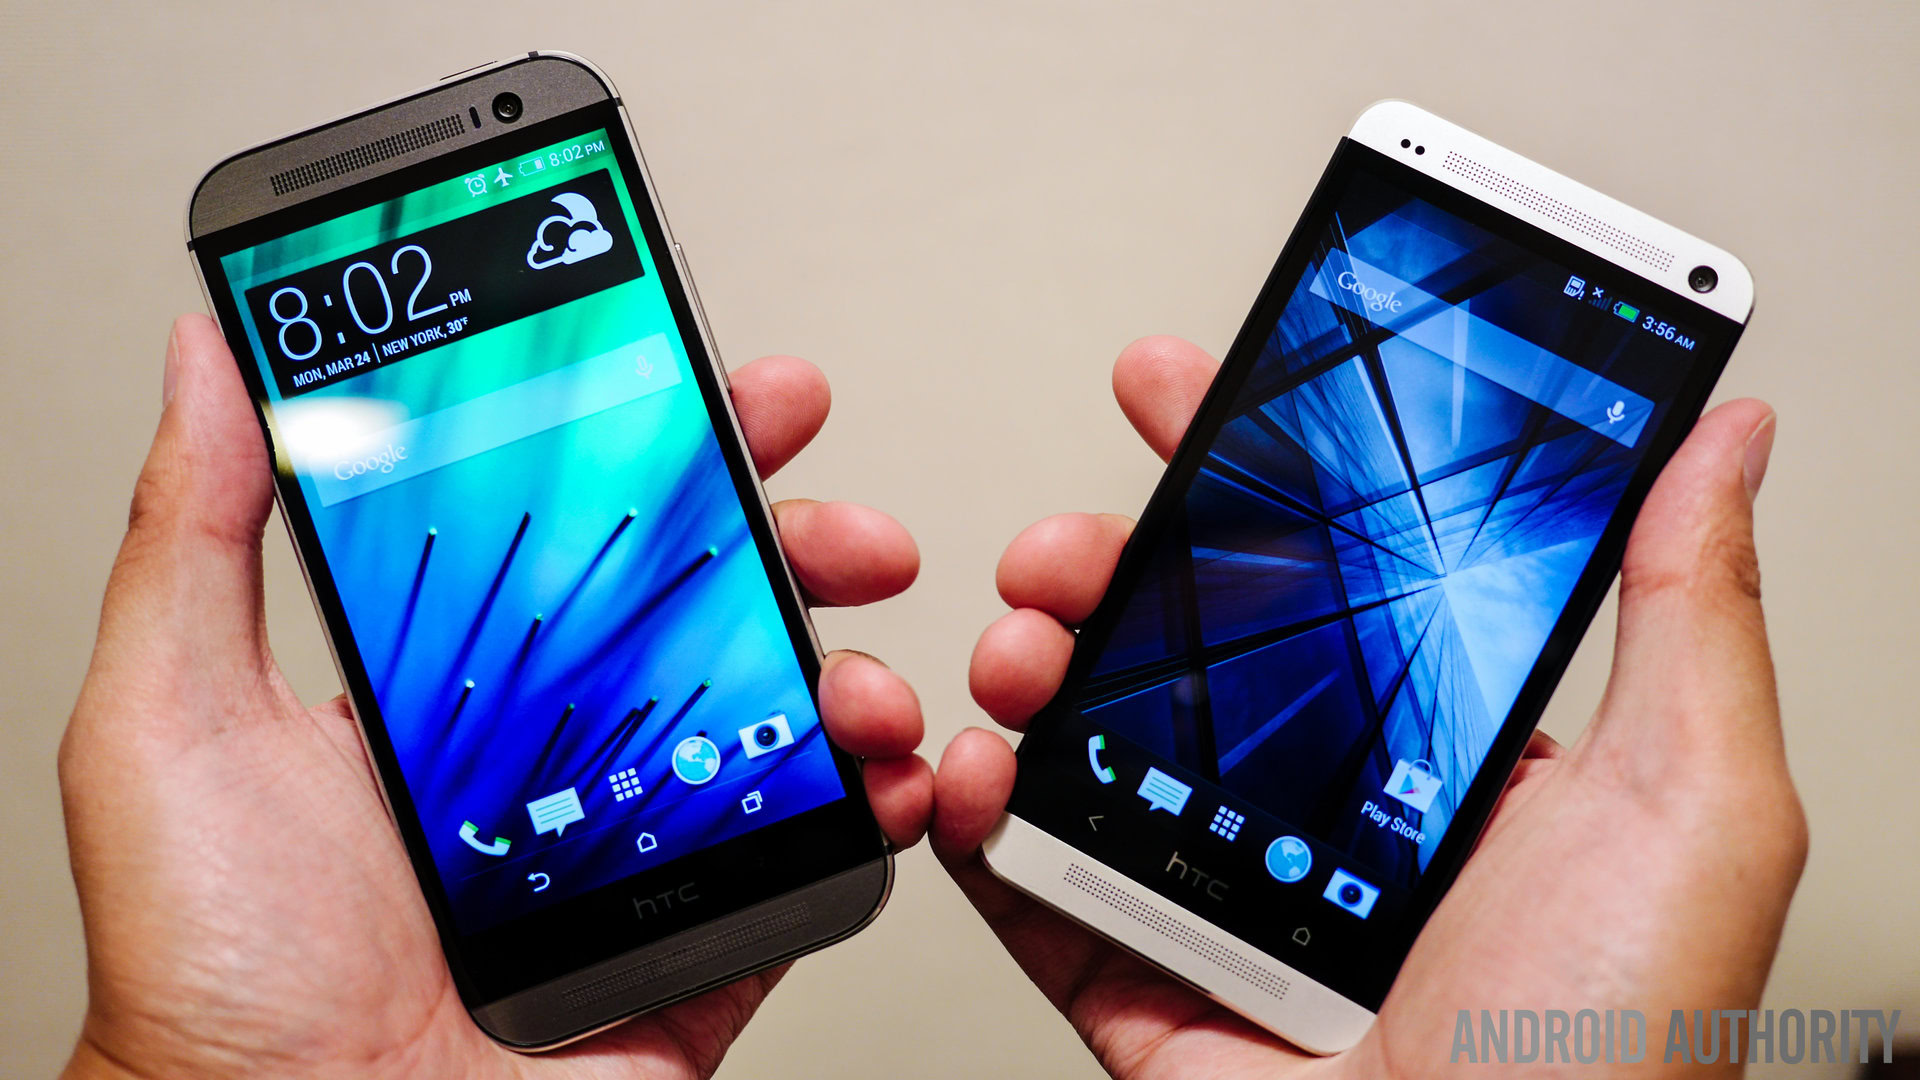 htc one m8 vs htc one m7 quick look aa handheld (3 of 6)